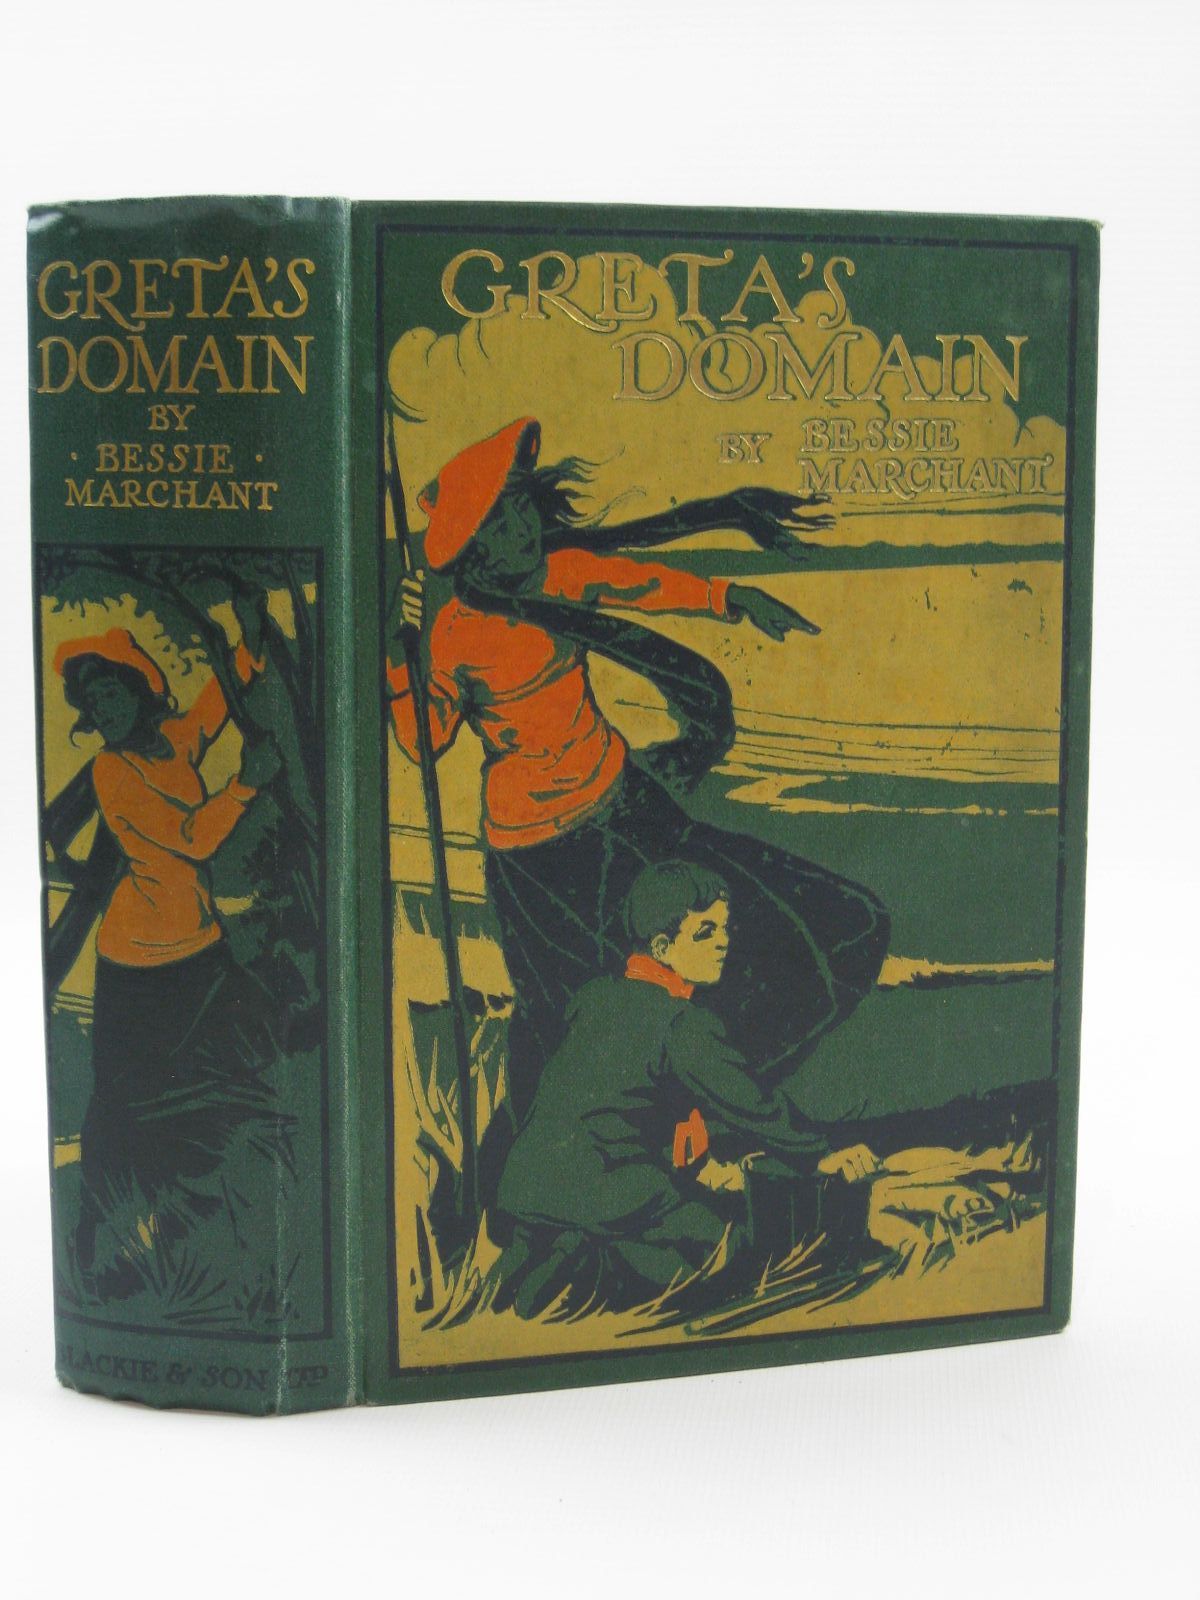 Cover of GRETA'S DOMAIN by Bessie Marchant